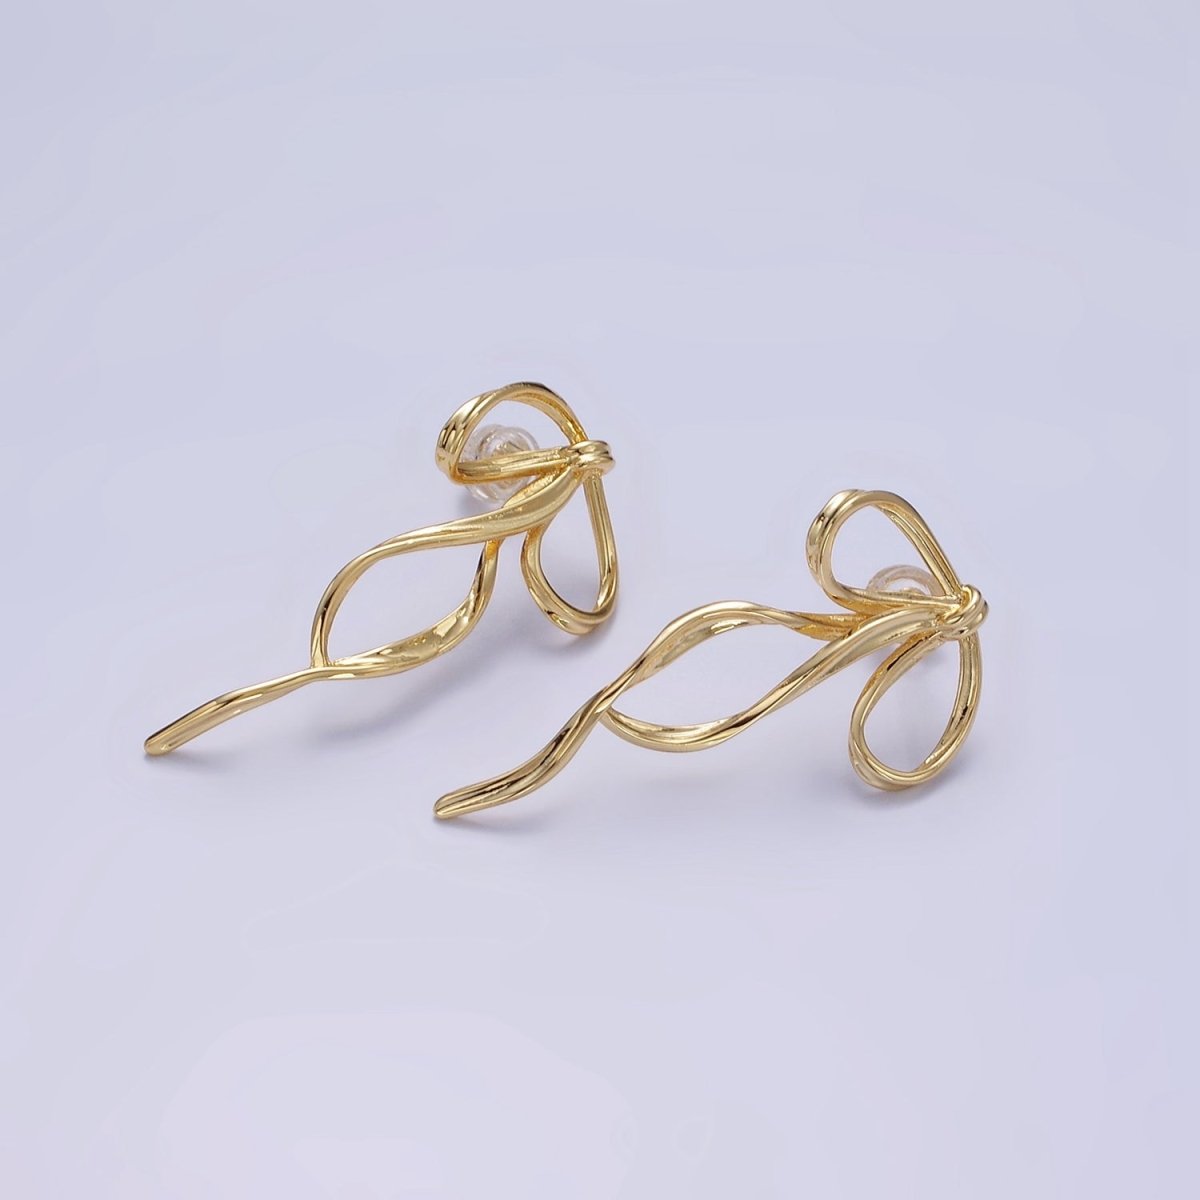 14K Gold Filled Curved Tied Ribbon Bow Stud Earrings in Gold & Silver | Q170 Q171 - DLUXCA